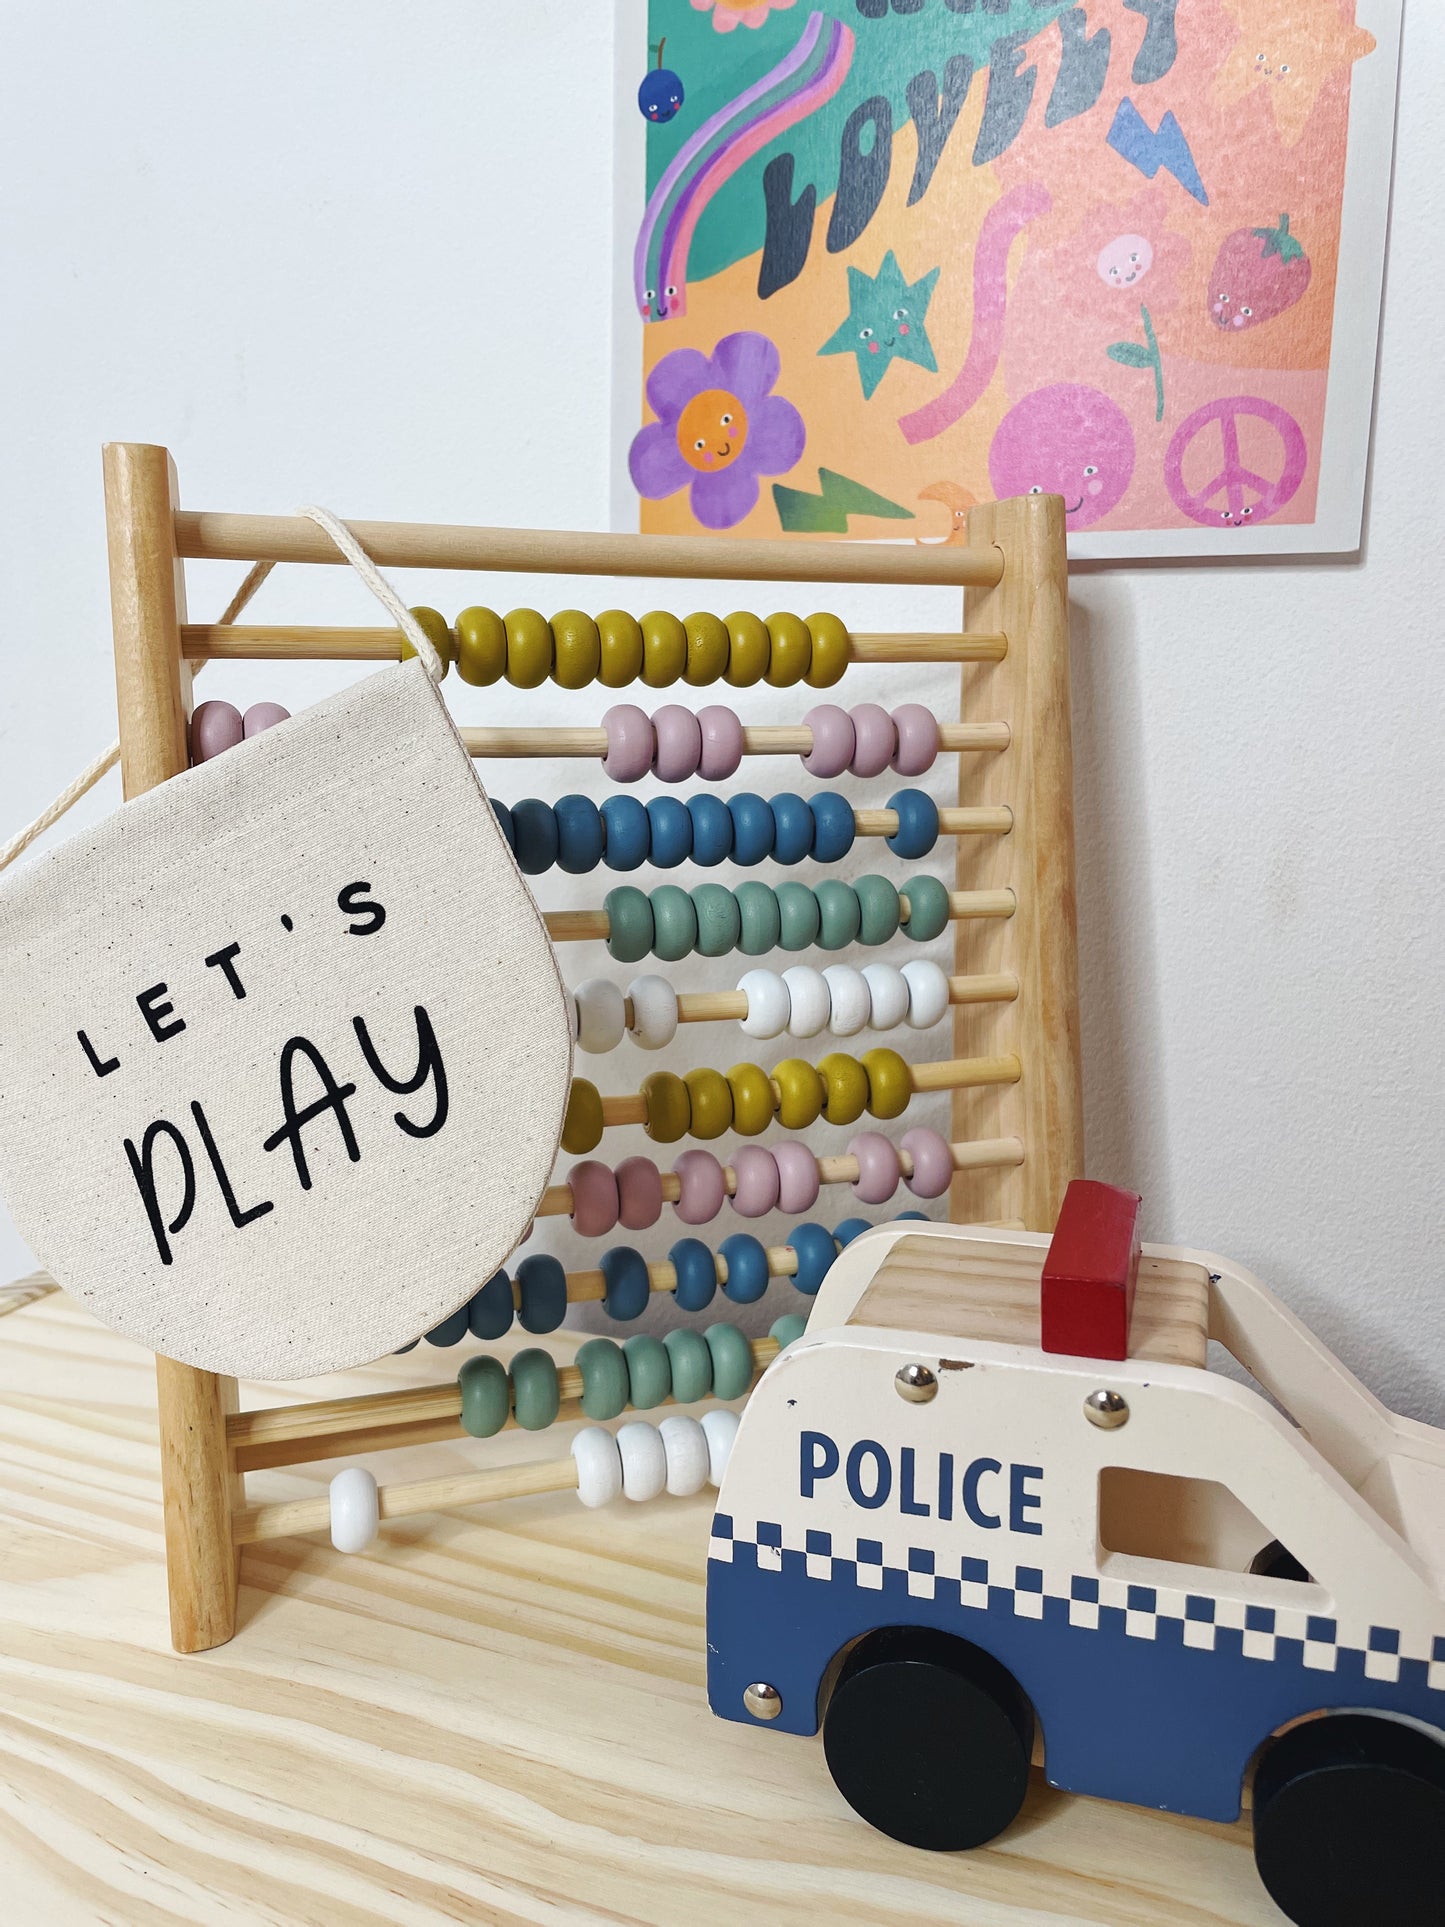 Colourful abacus, print and toy, with a beige banner hanging off the abacus, reading 'Let's Pla'